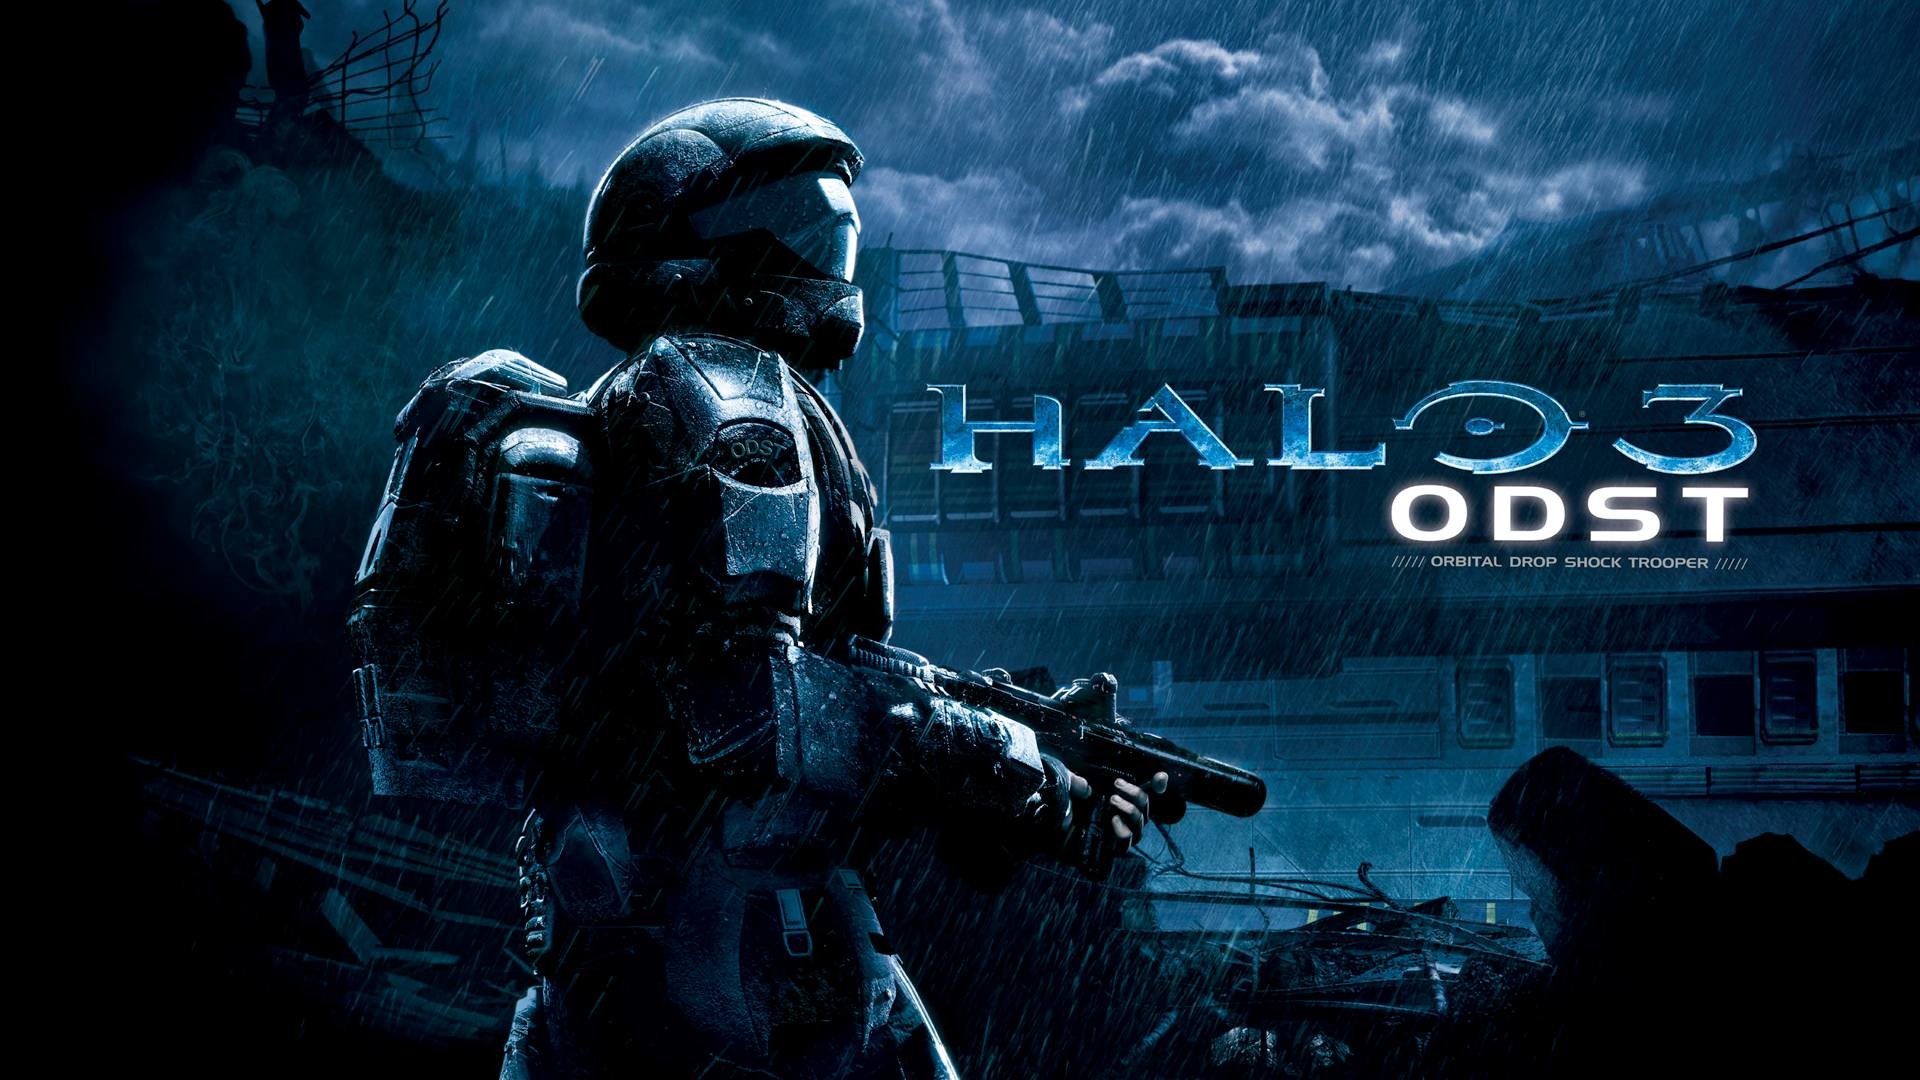 1920x1080 Wallpapers For > Halo 3 Odst Wallpaper 